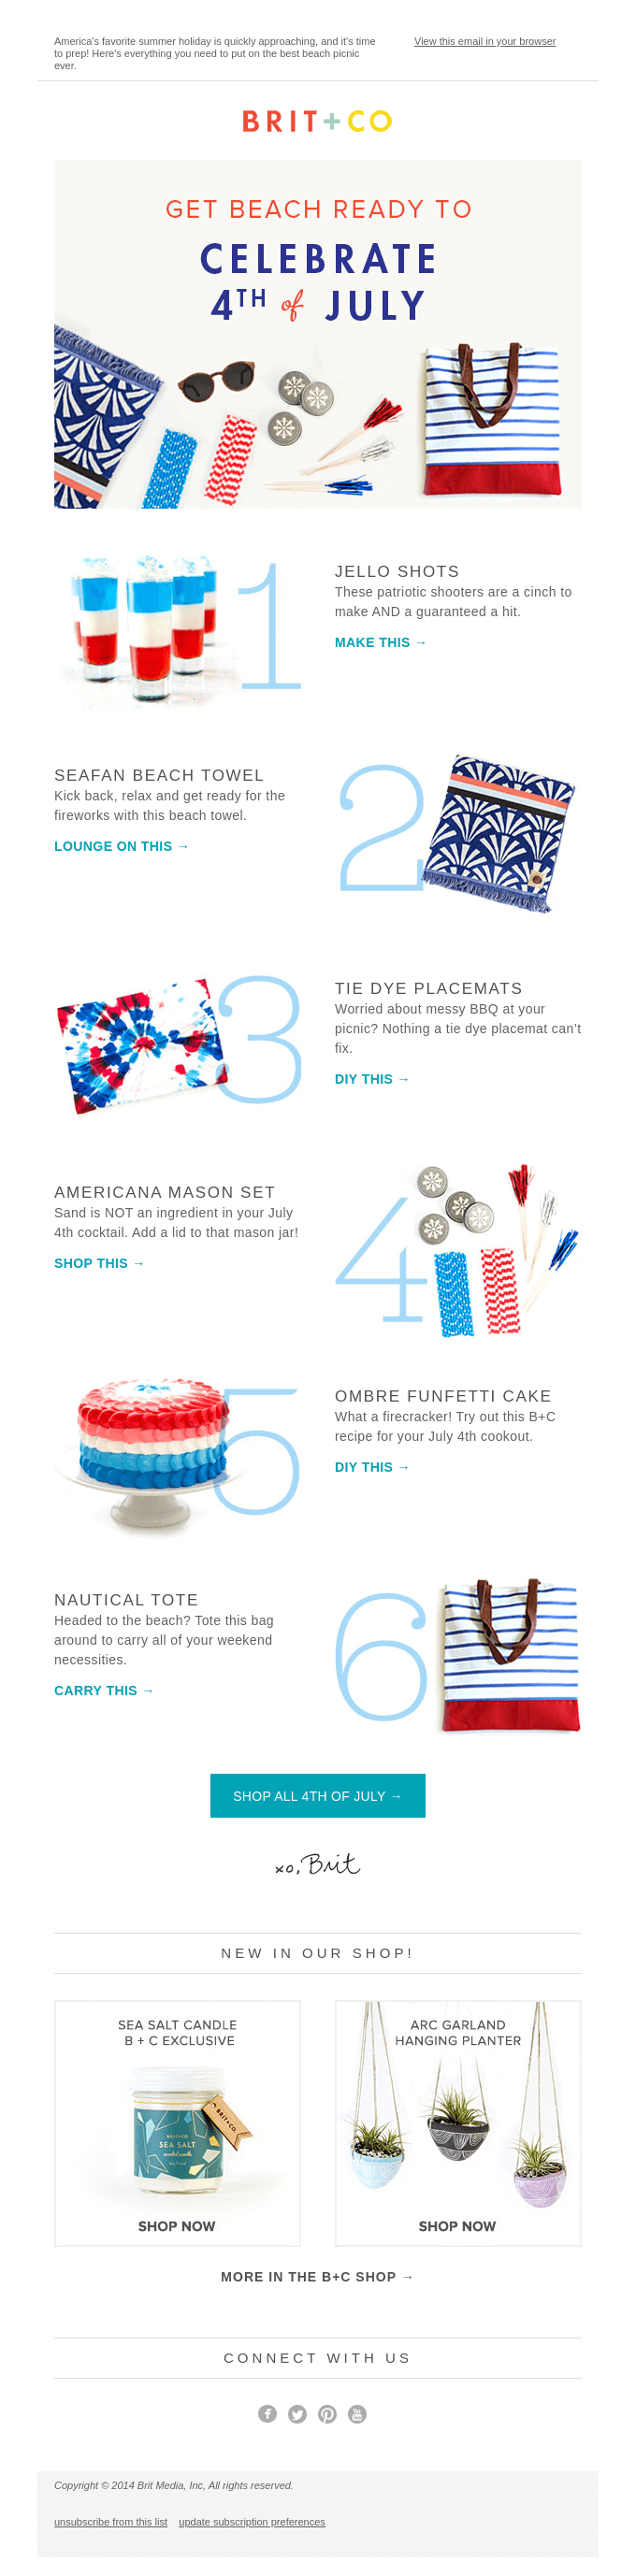 July 4th newsletter example from Brit + Co